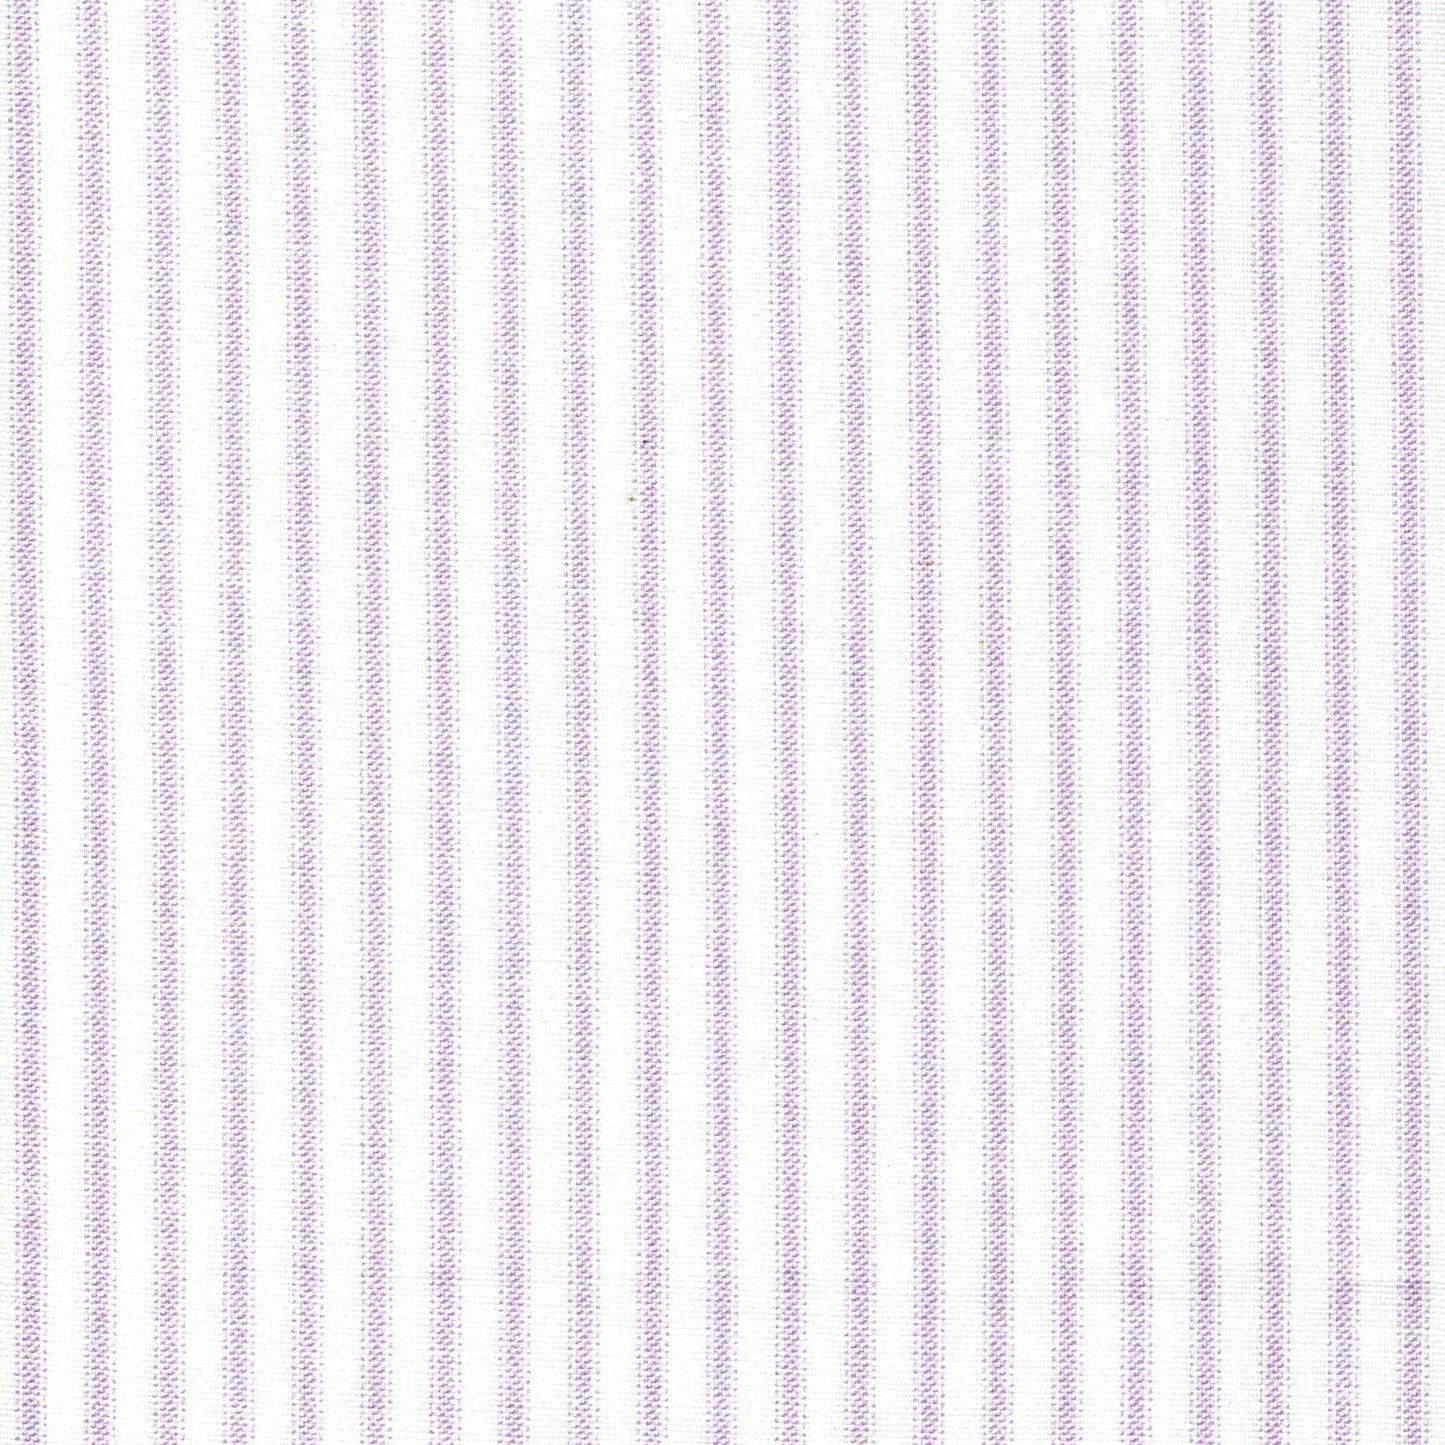 Tailored Crib Skirt in Classic Orchid Lavender Ticking Stripe on White